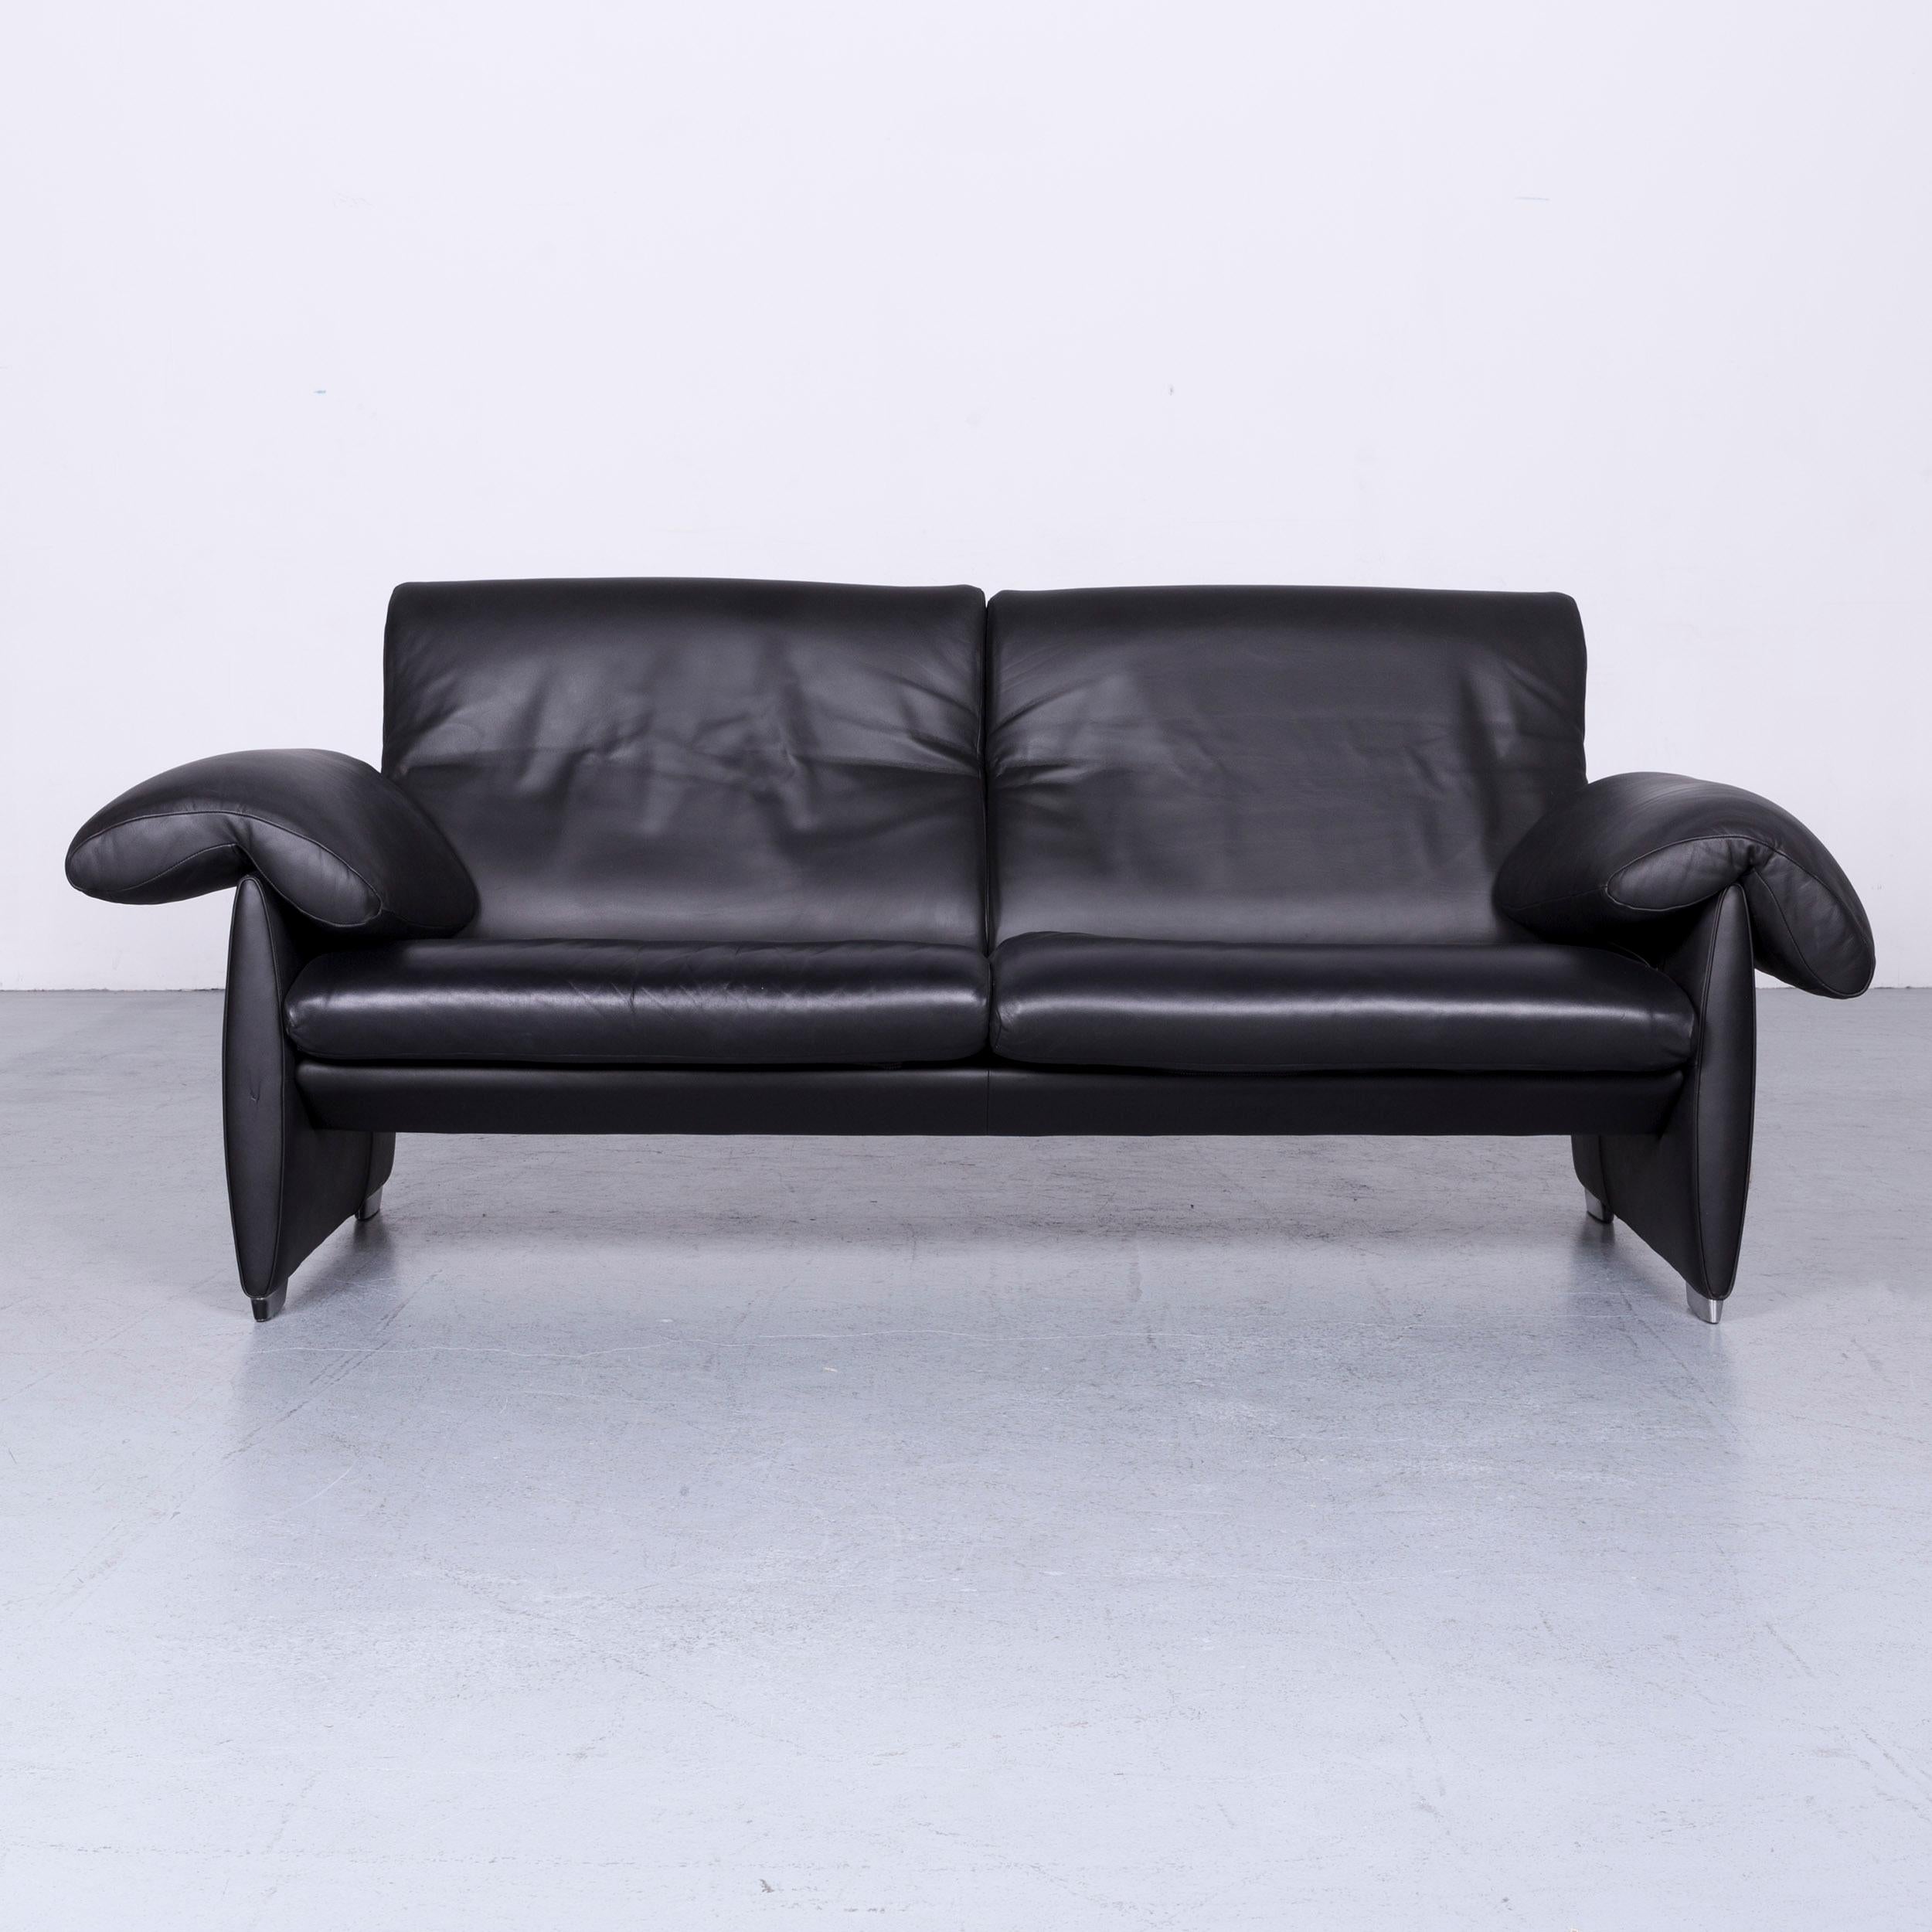 We bring to you an De Sede DS 10 designer sofa black leather three-seat couch.